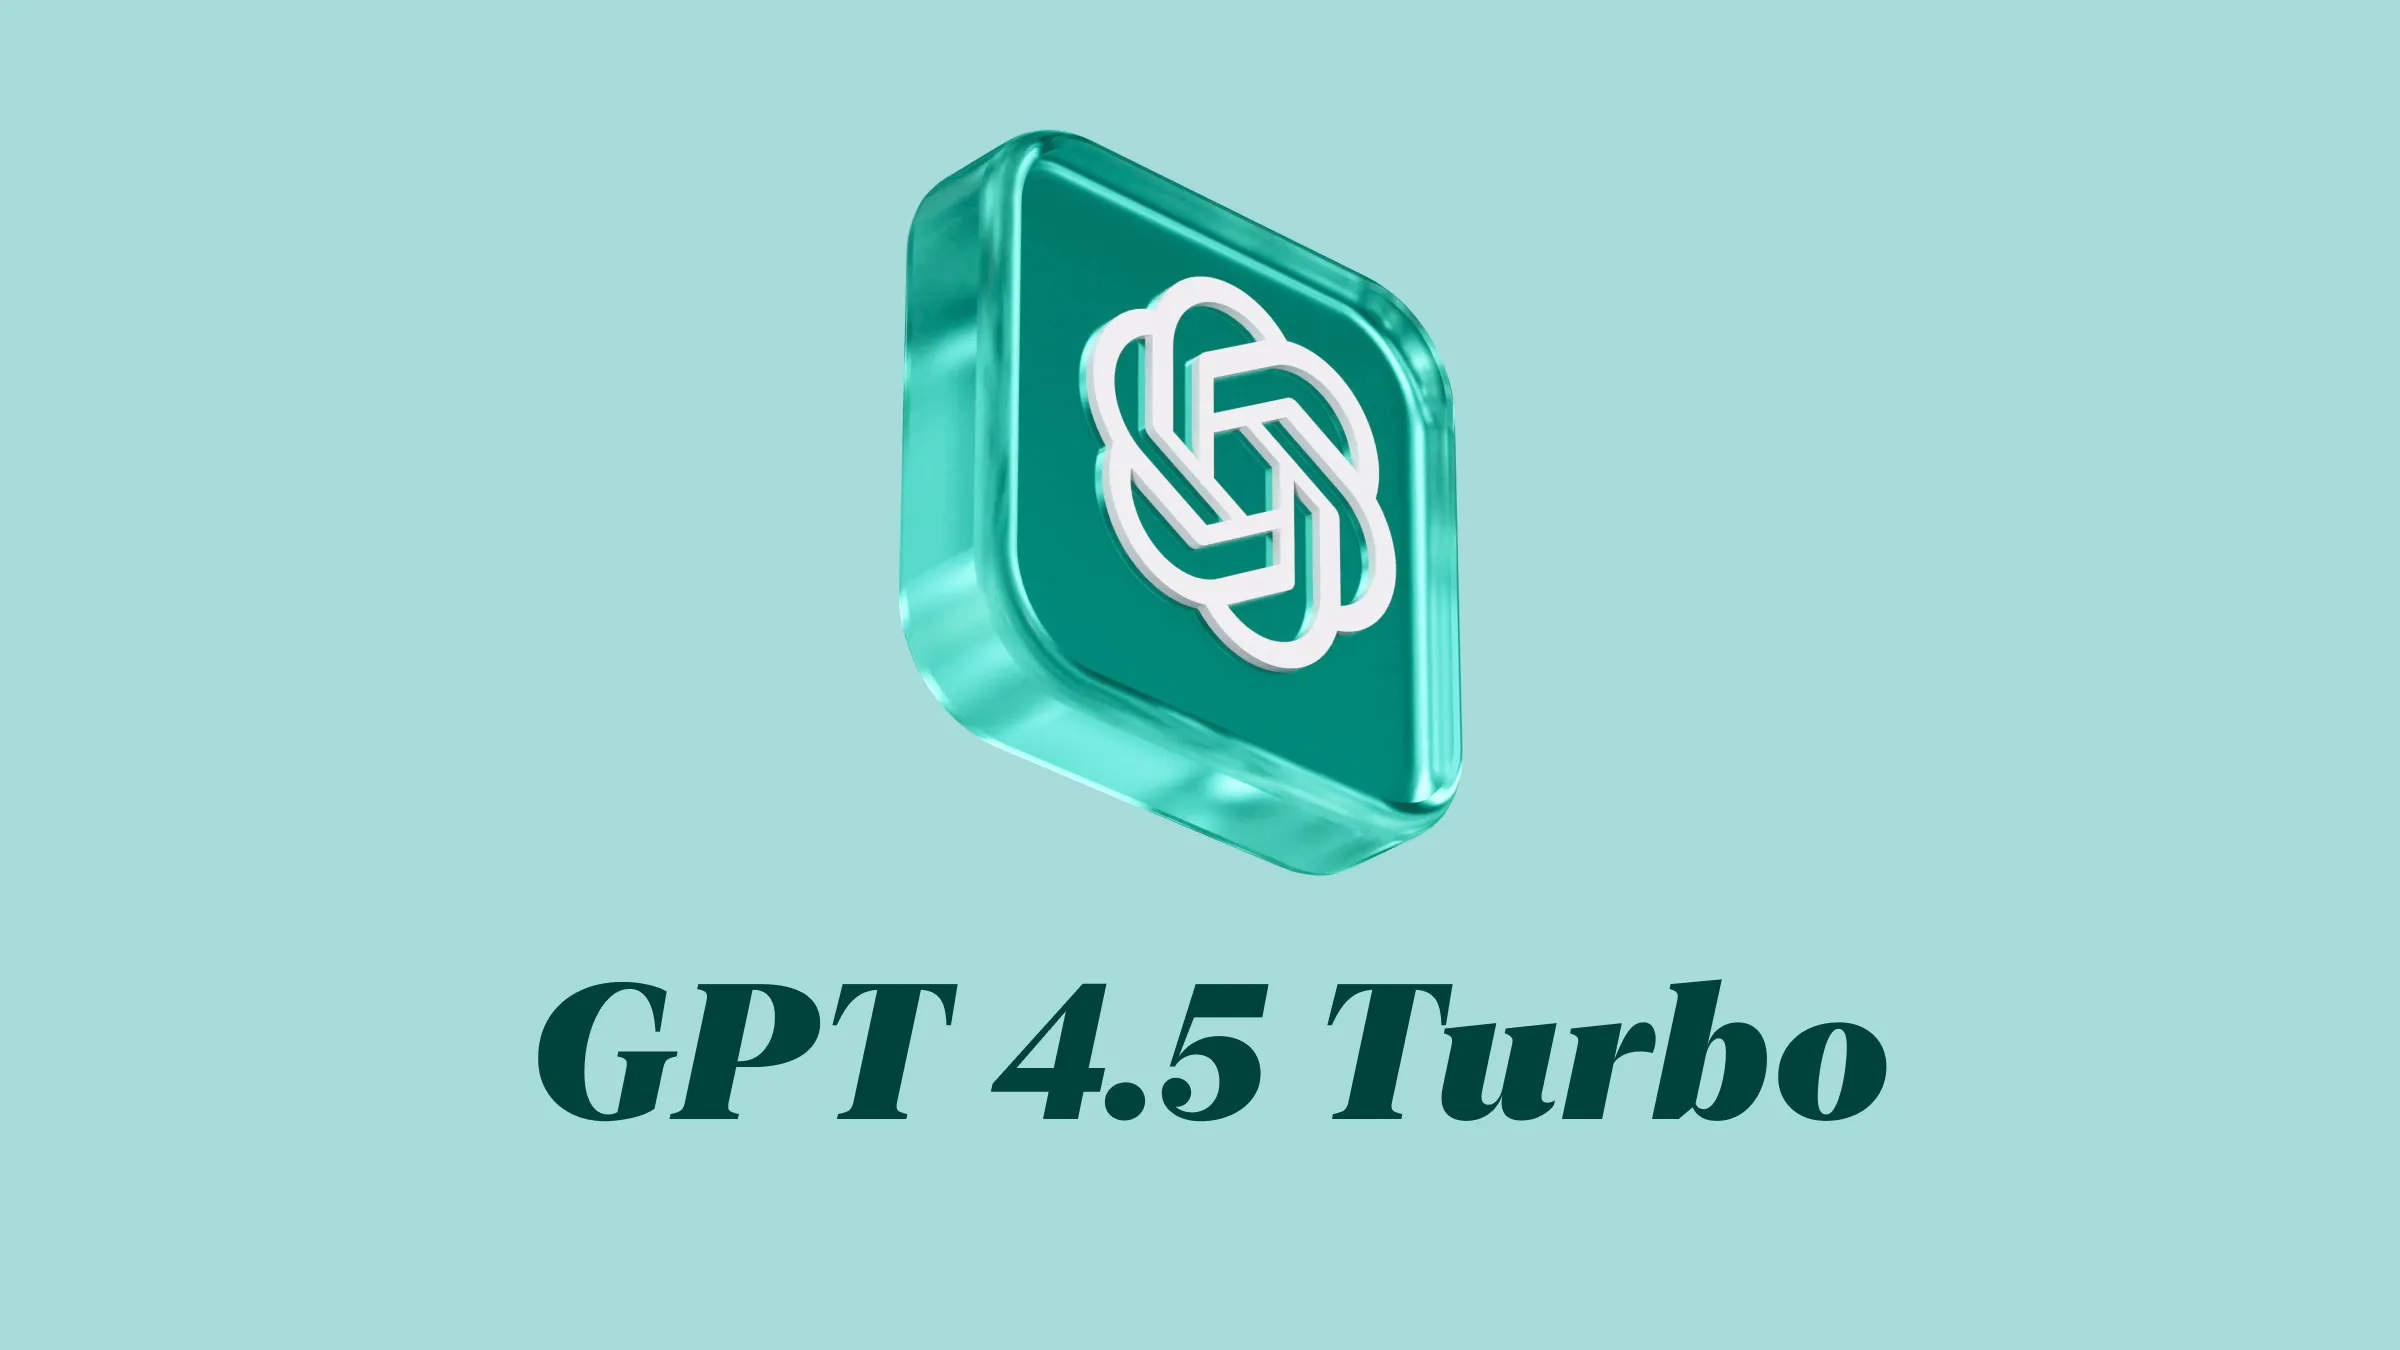 GPT 4.5 Turbo: OpenAI Blog Accidently Leaked Information About GPT-4.5 Turbo